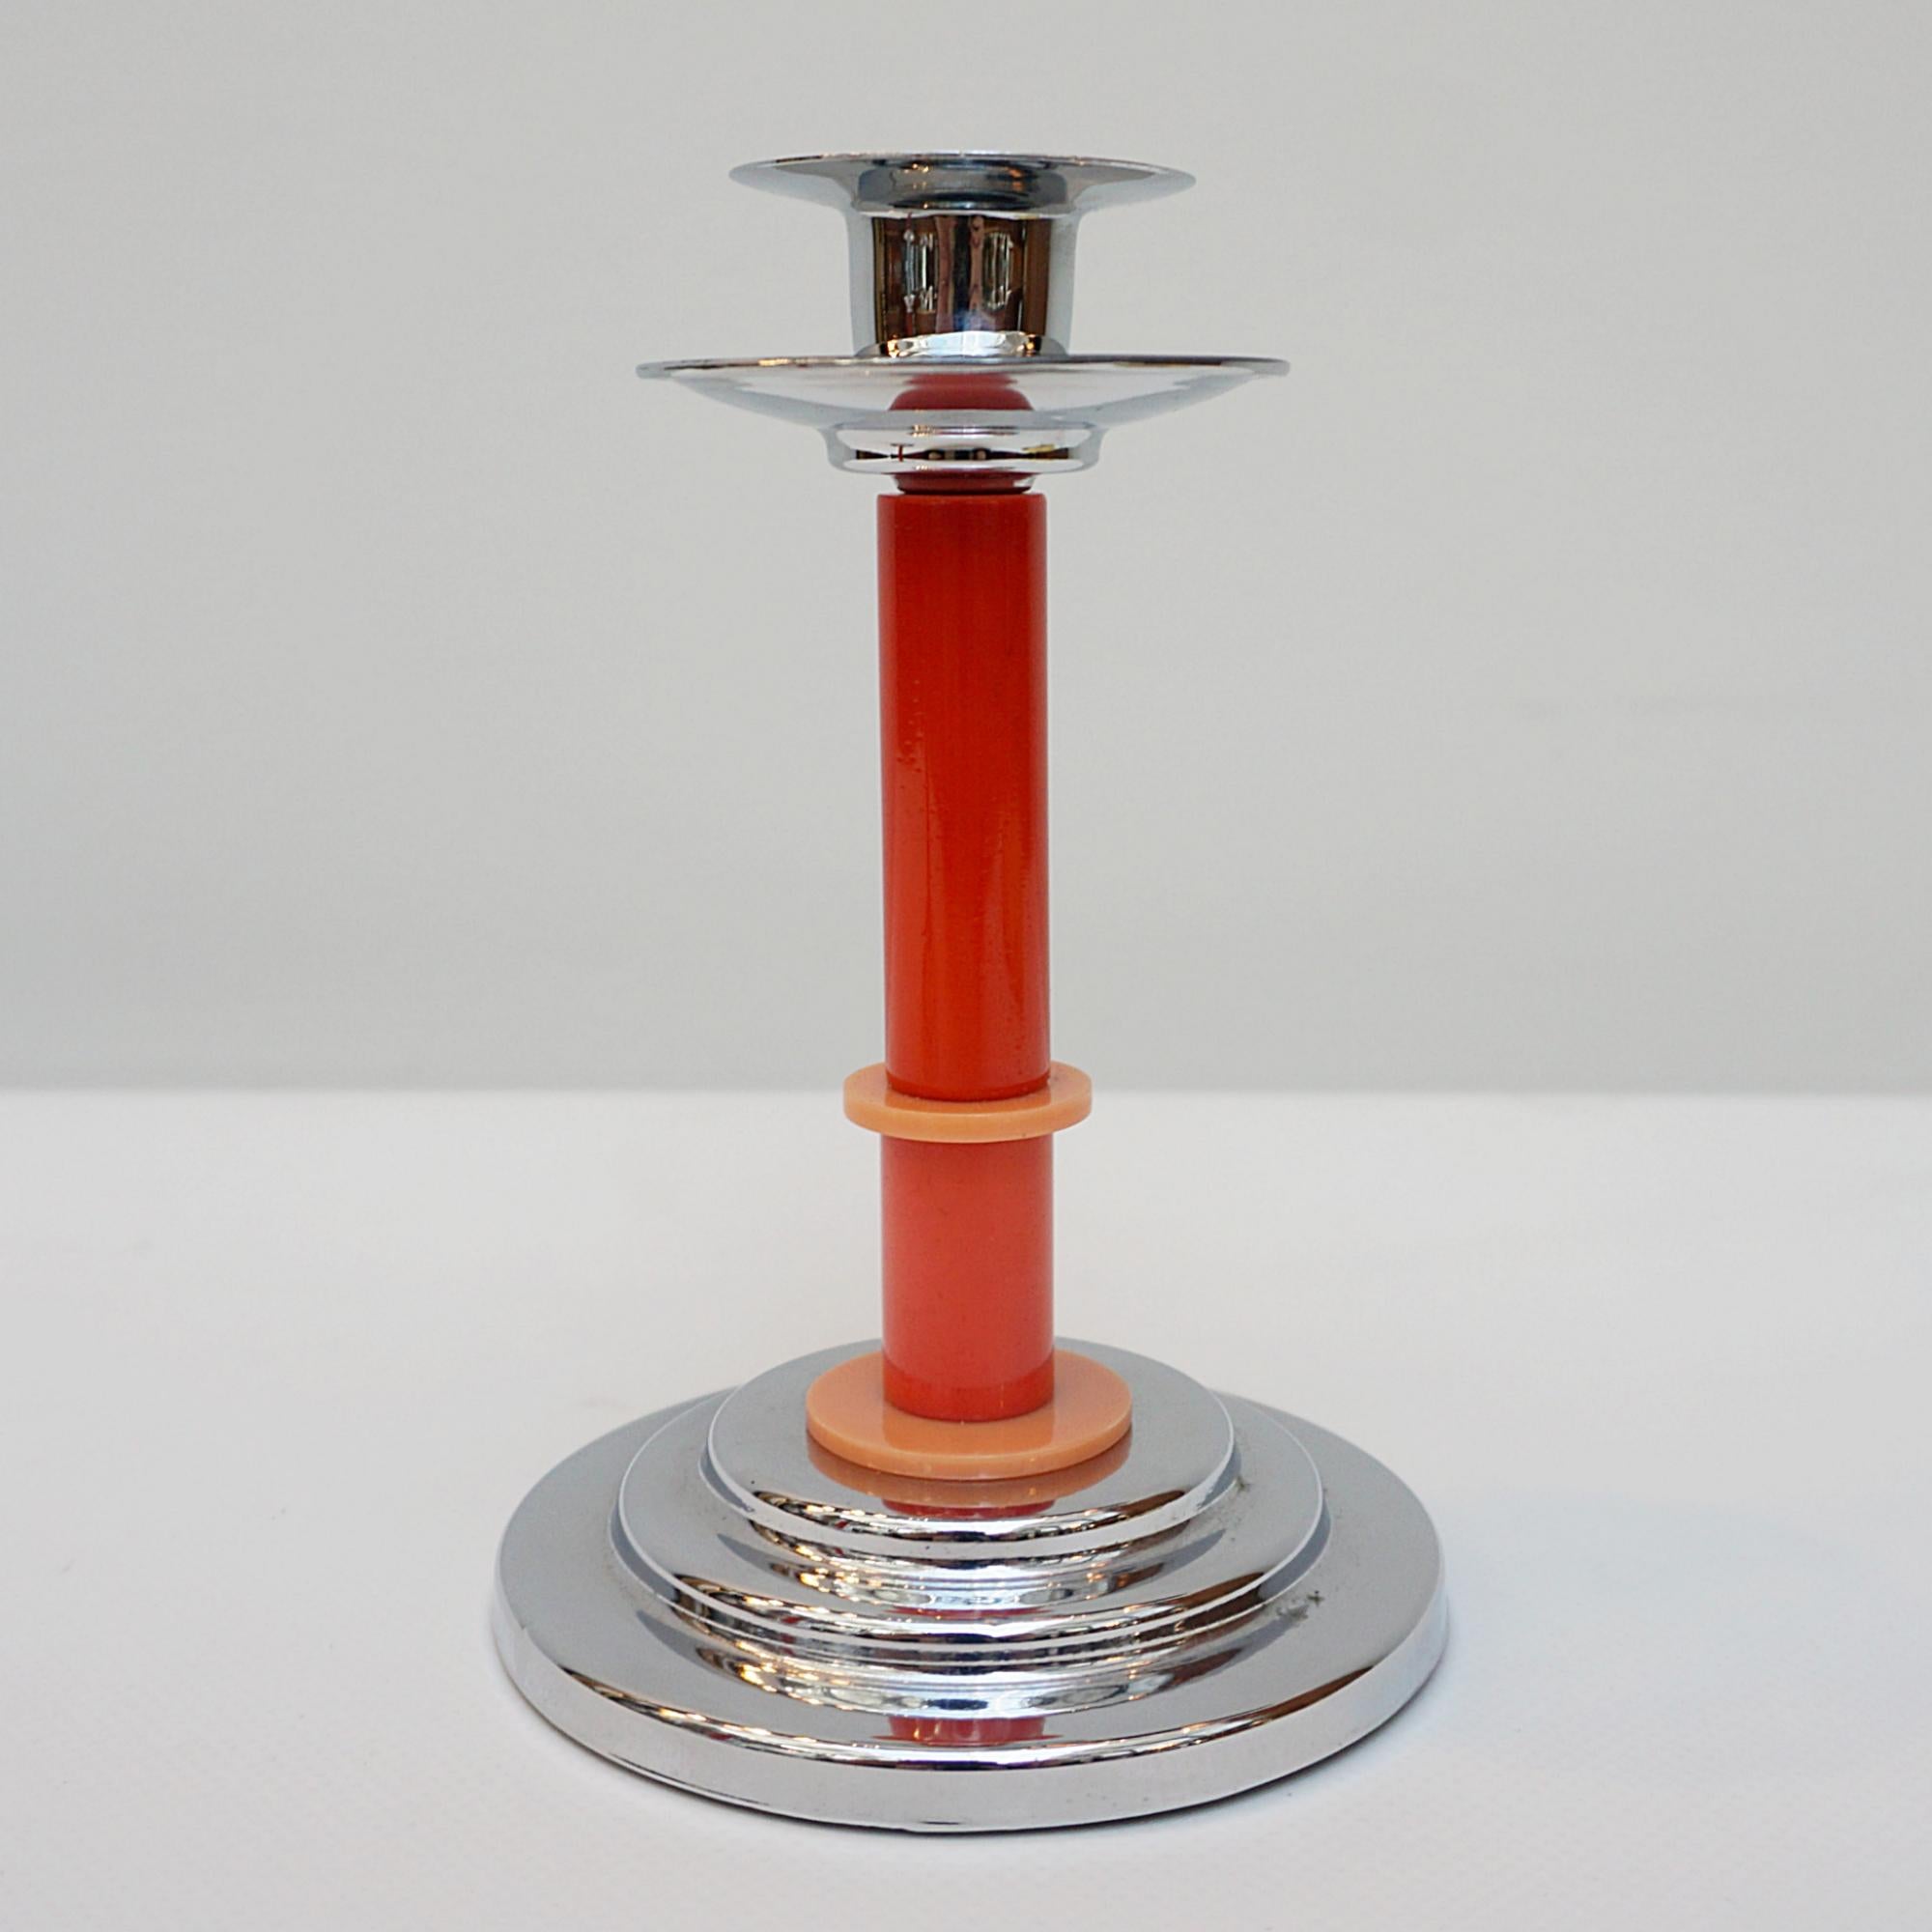 A pair of Art Deco style candlesticks. Red and orange dual ringed bakelite stem with chromed metal wax pan. Set over a rounded, stepped chromed metal base with cork insert. 

Dimensions: H 15.5cm W 10cm

Origin: English

Item Number: